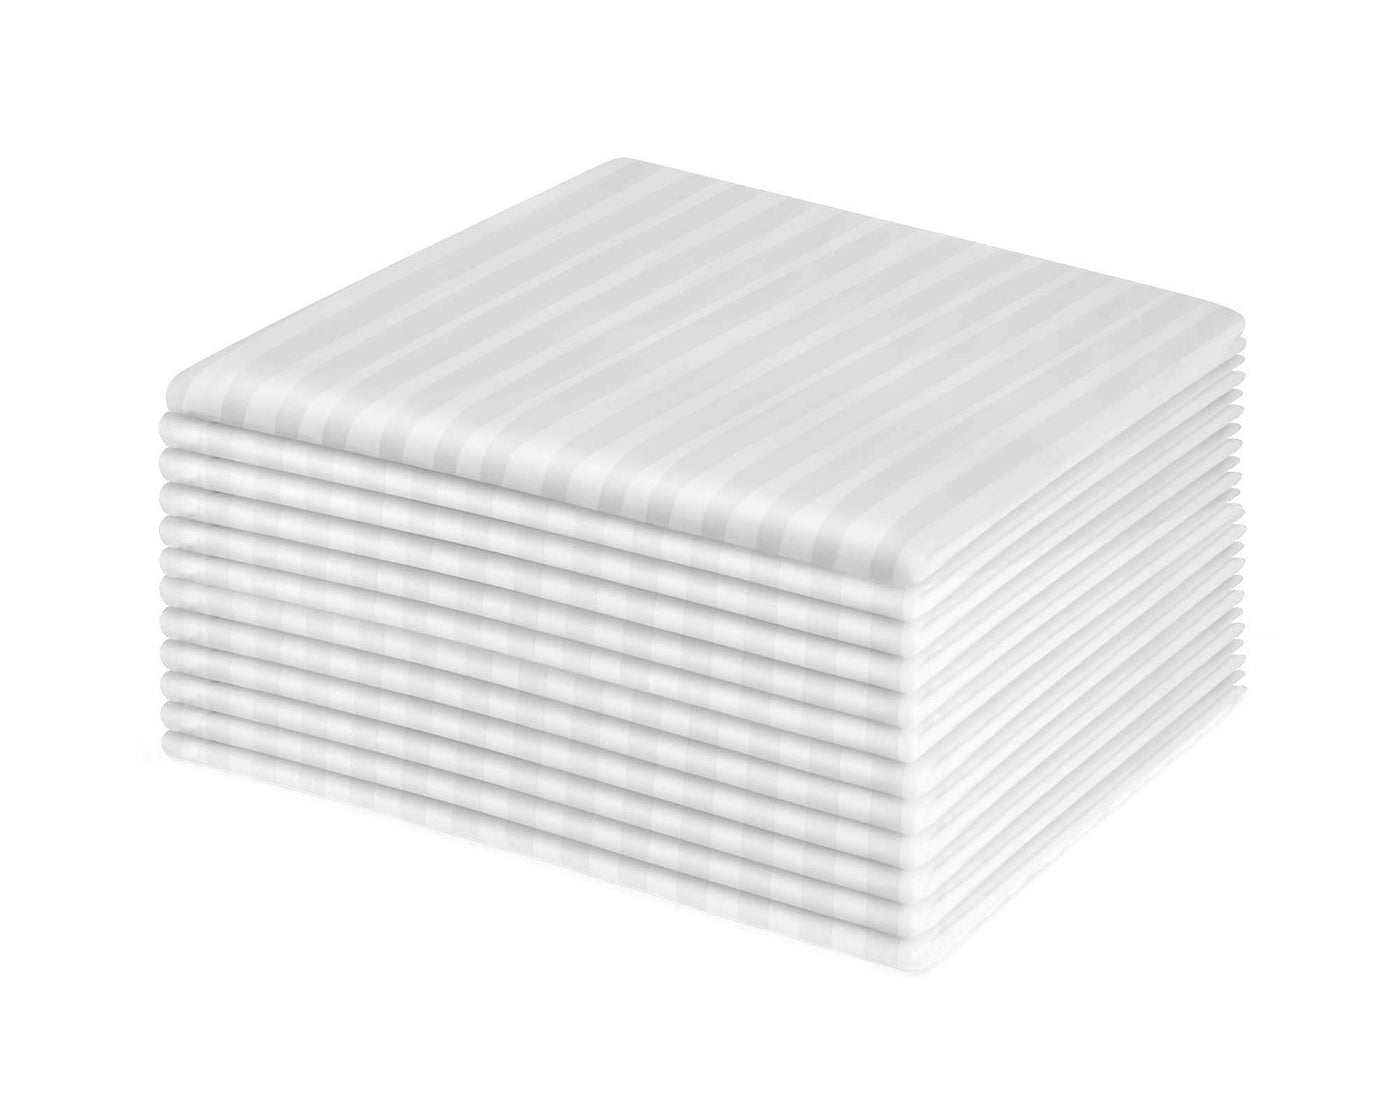 Tone on Tone Striped pillowcases stacked of 12 pcs